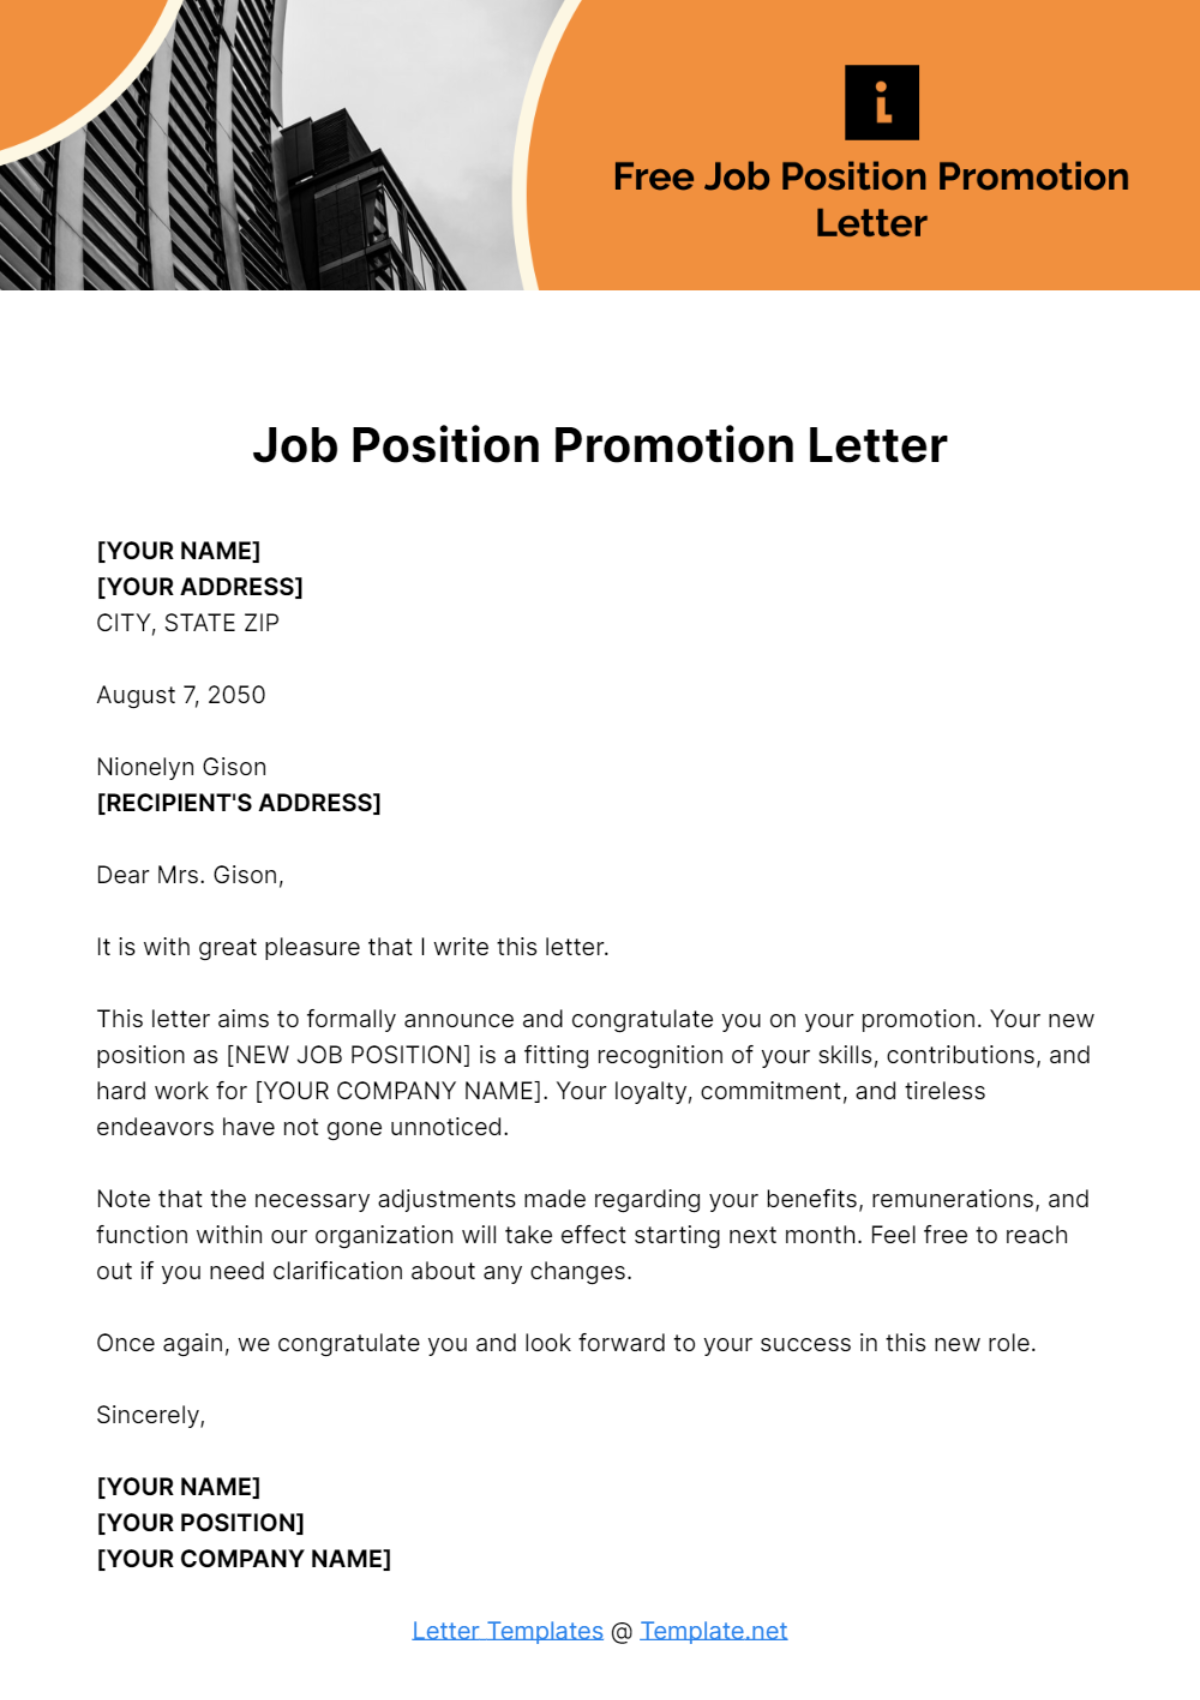 Free Job Position Promotion Letter Template